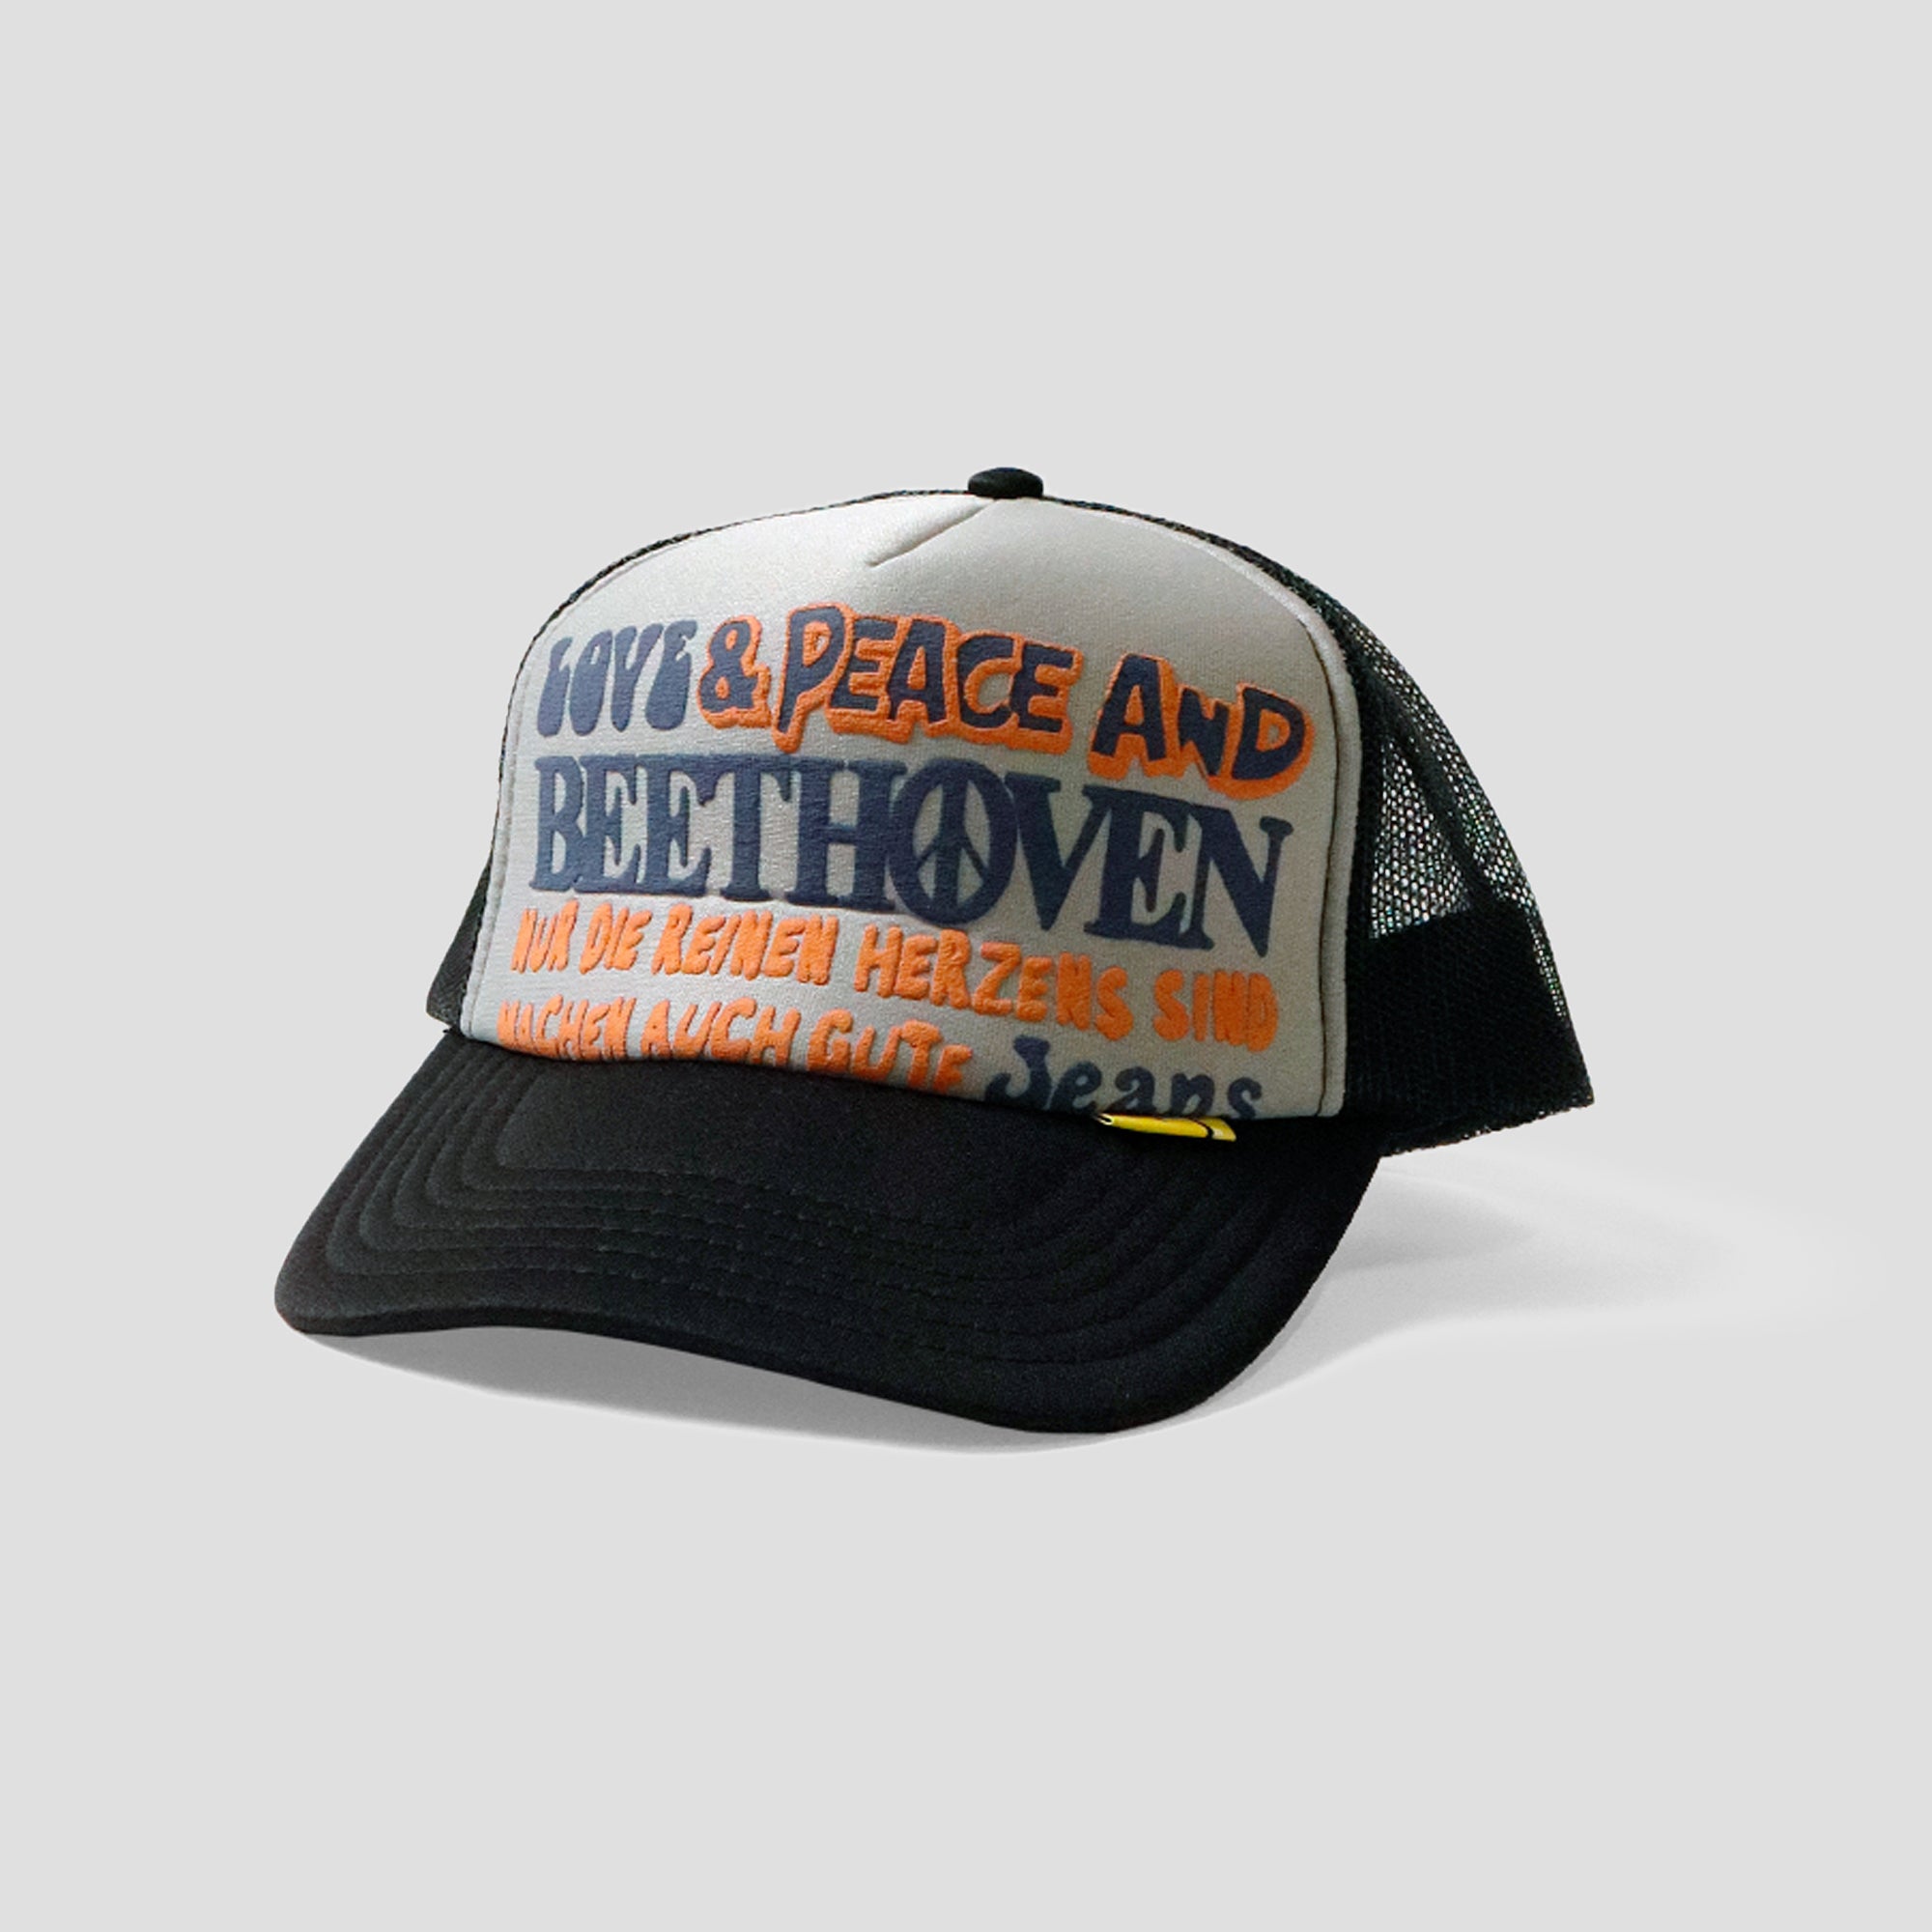 LOVE & PEACE AND BEETHOVEN TRUCKER HAT